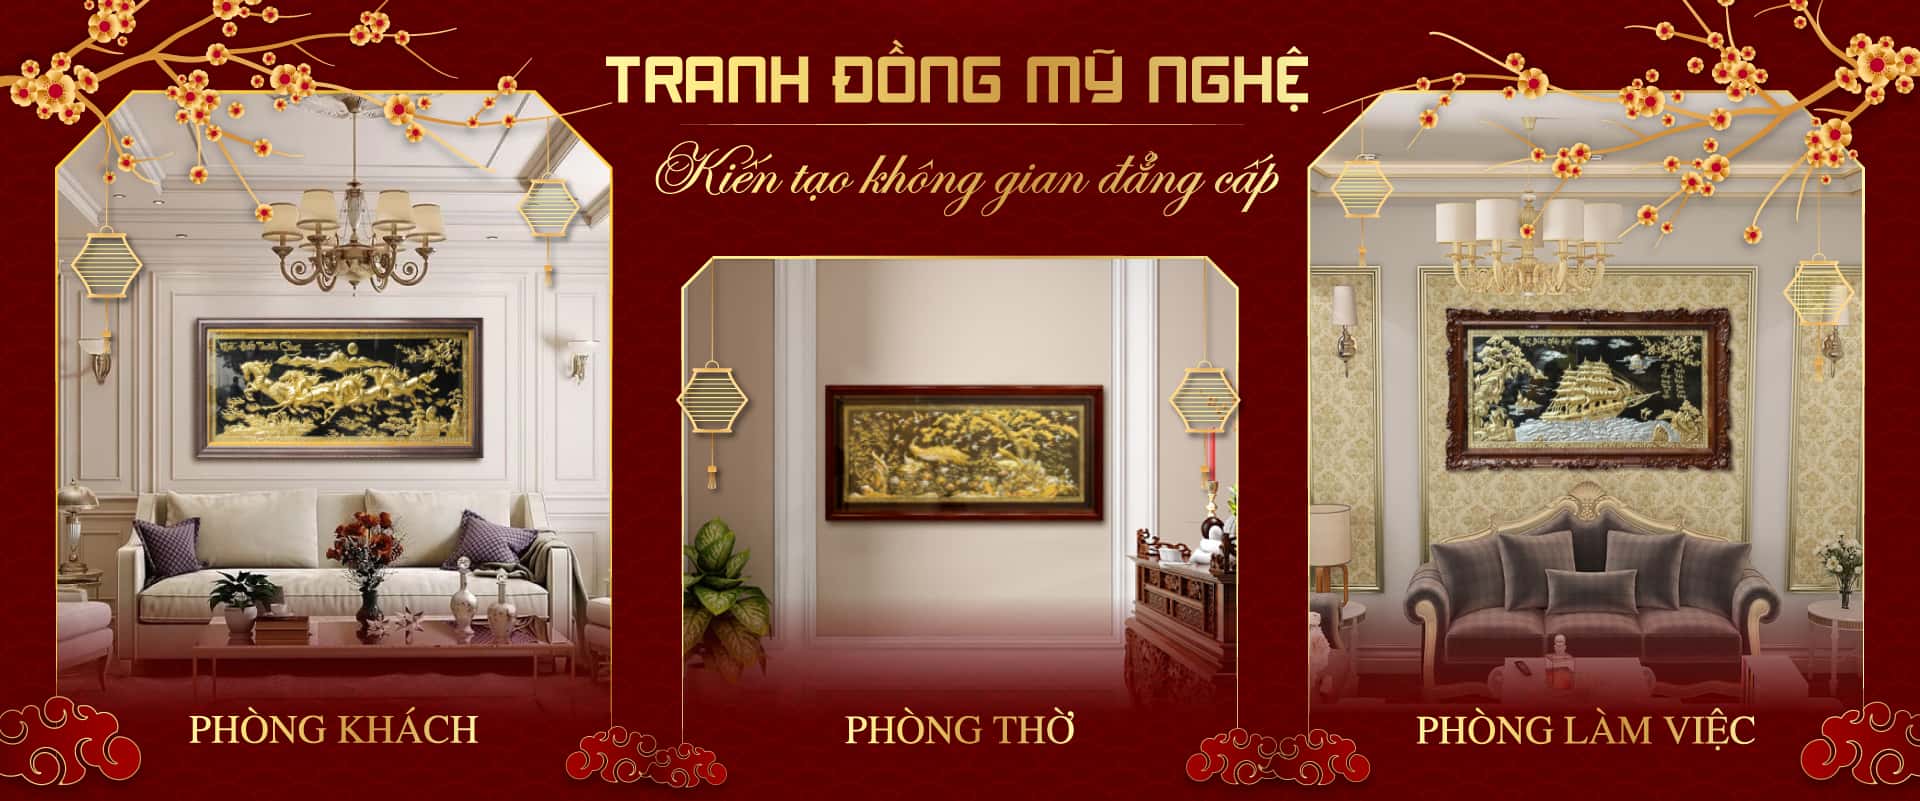 tranh dong my nghe